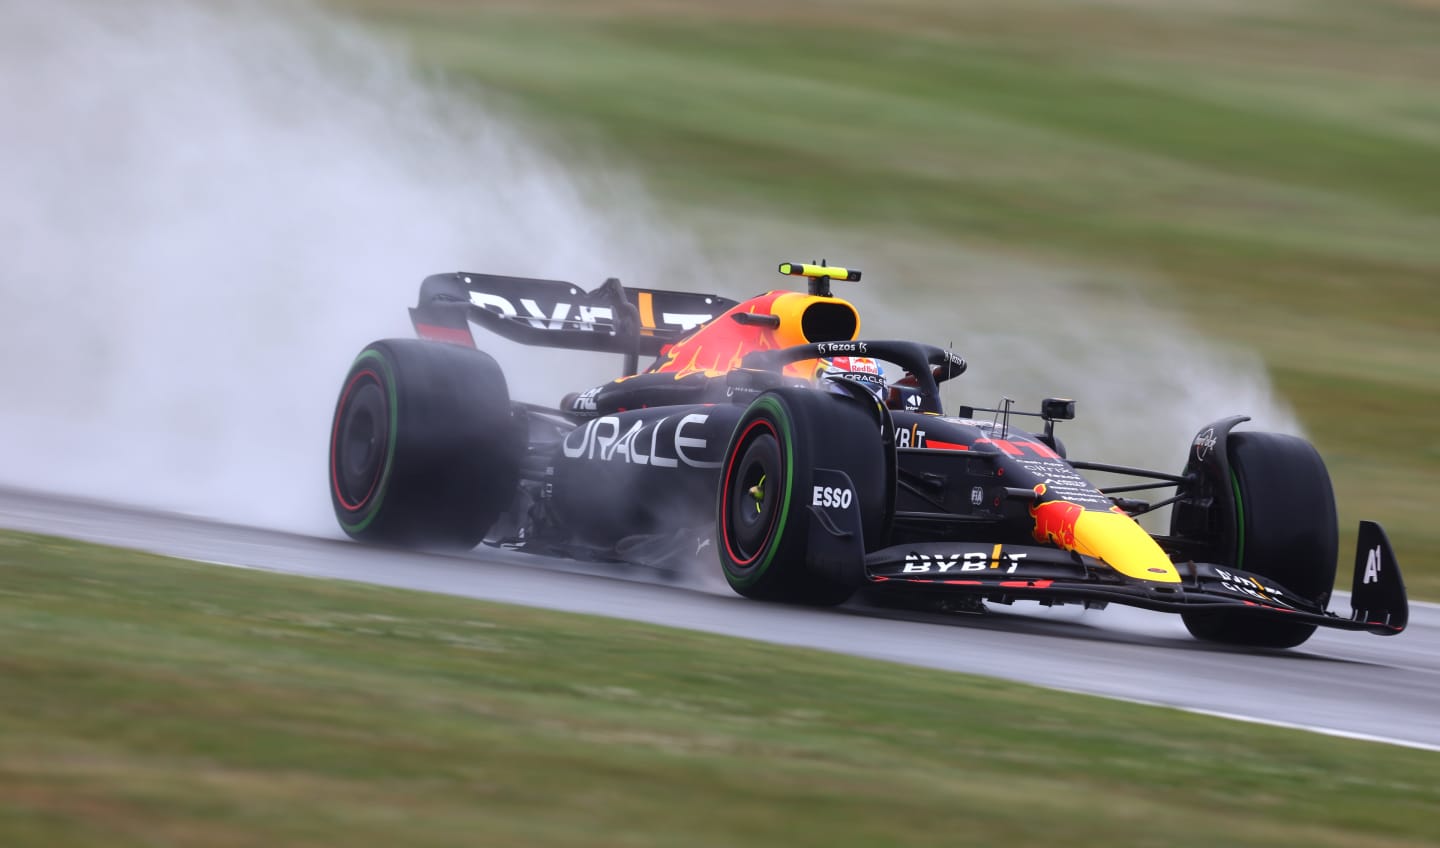 NORTHAMPTON, ENGLAND - JULY 02: Sergio Perez of Mexico driving the (11) Oracle Red Bull Racing RB18 on track during qualifying ahead of the F1 Grand Prix of Great Britain at Silverstone on July 02, 2022 in Northampton, England. (Photo by Clive Rose/Getty Images)